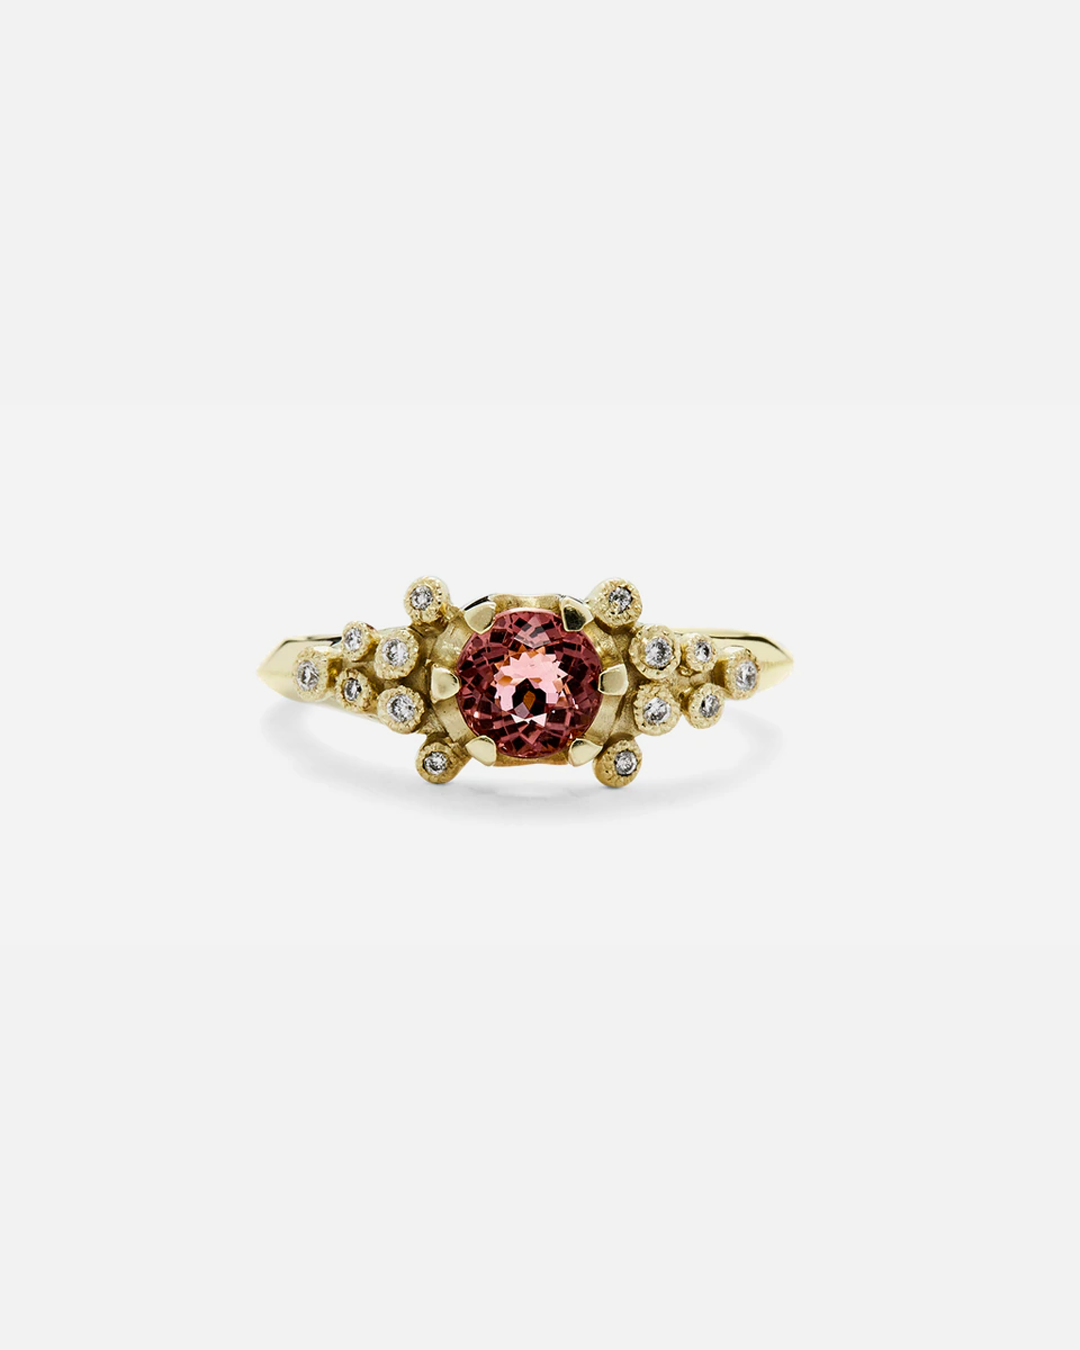 Melee E4 / Pink Tourmaline By Hiroyo in Engagement Rings Category